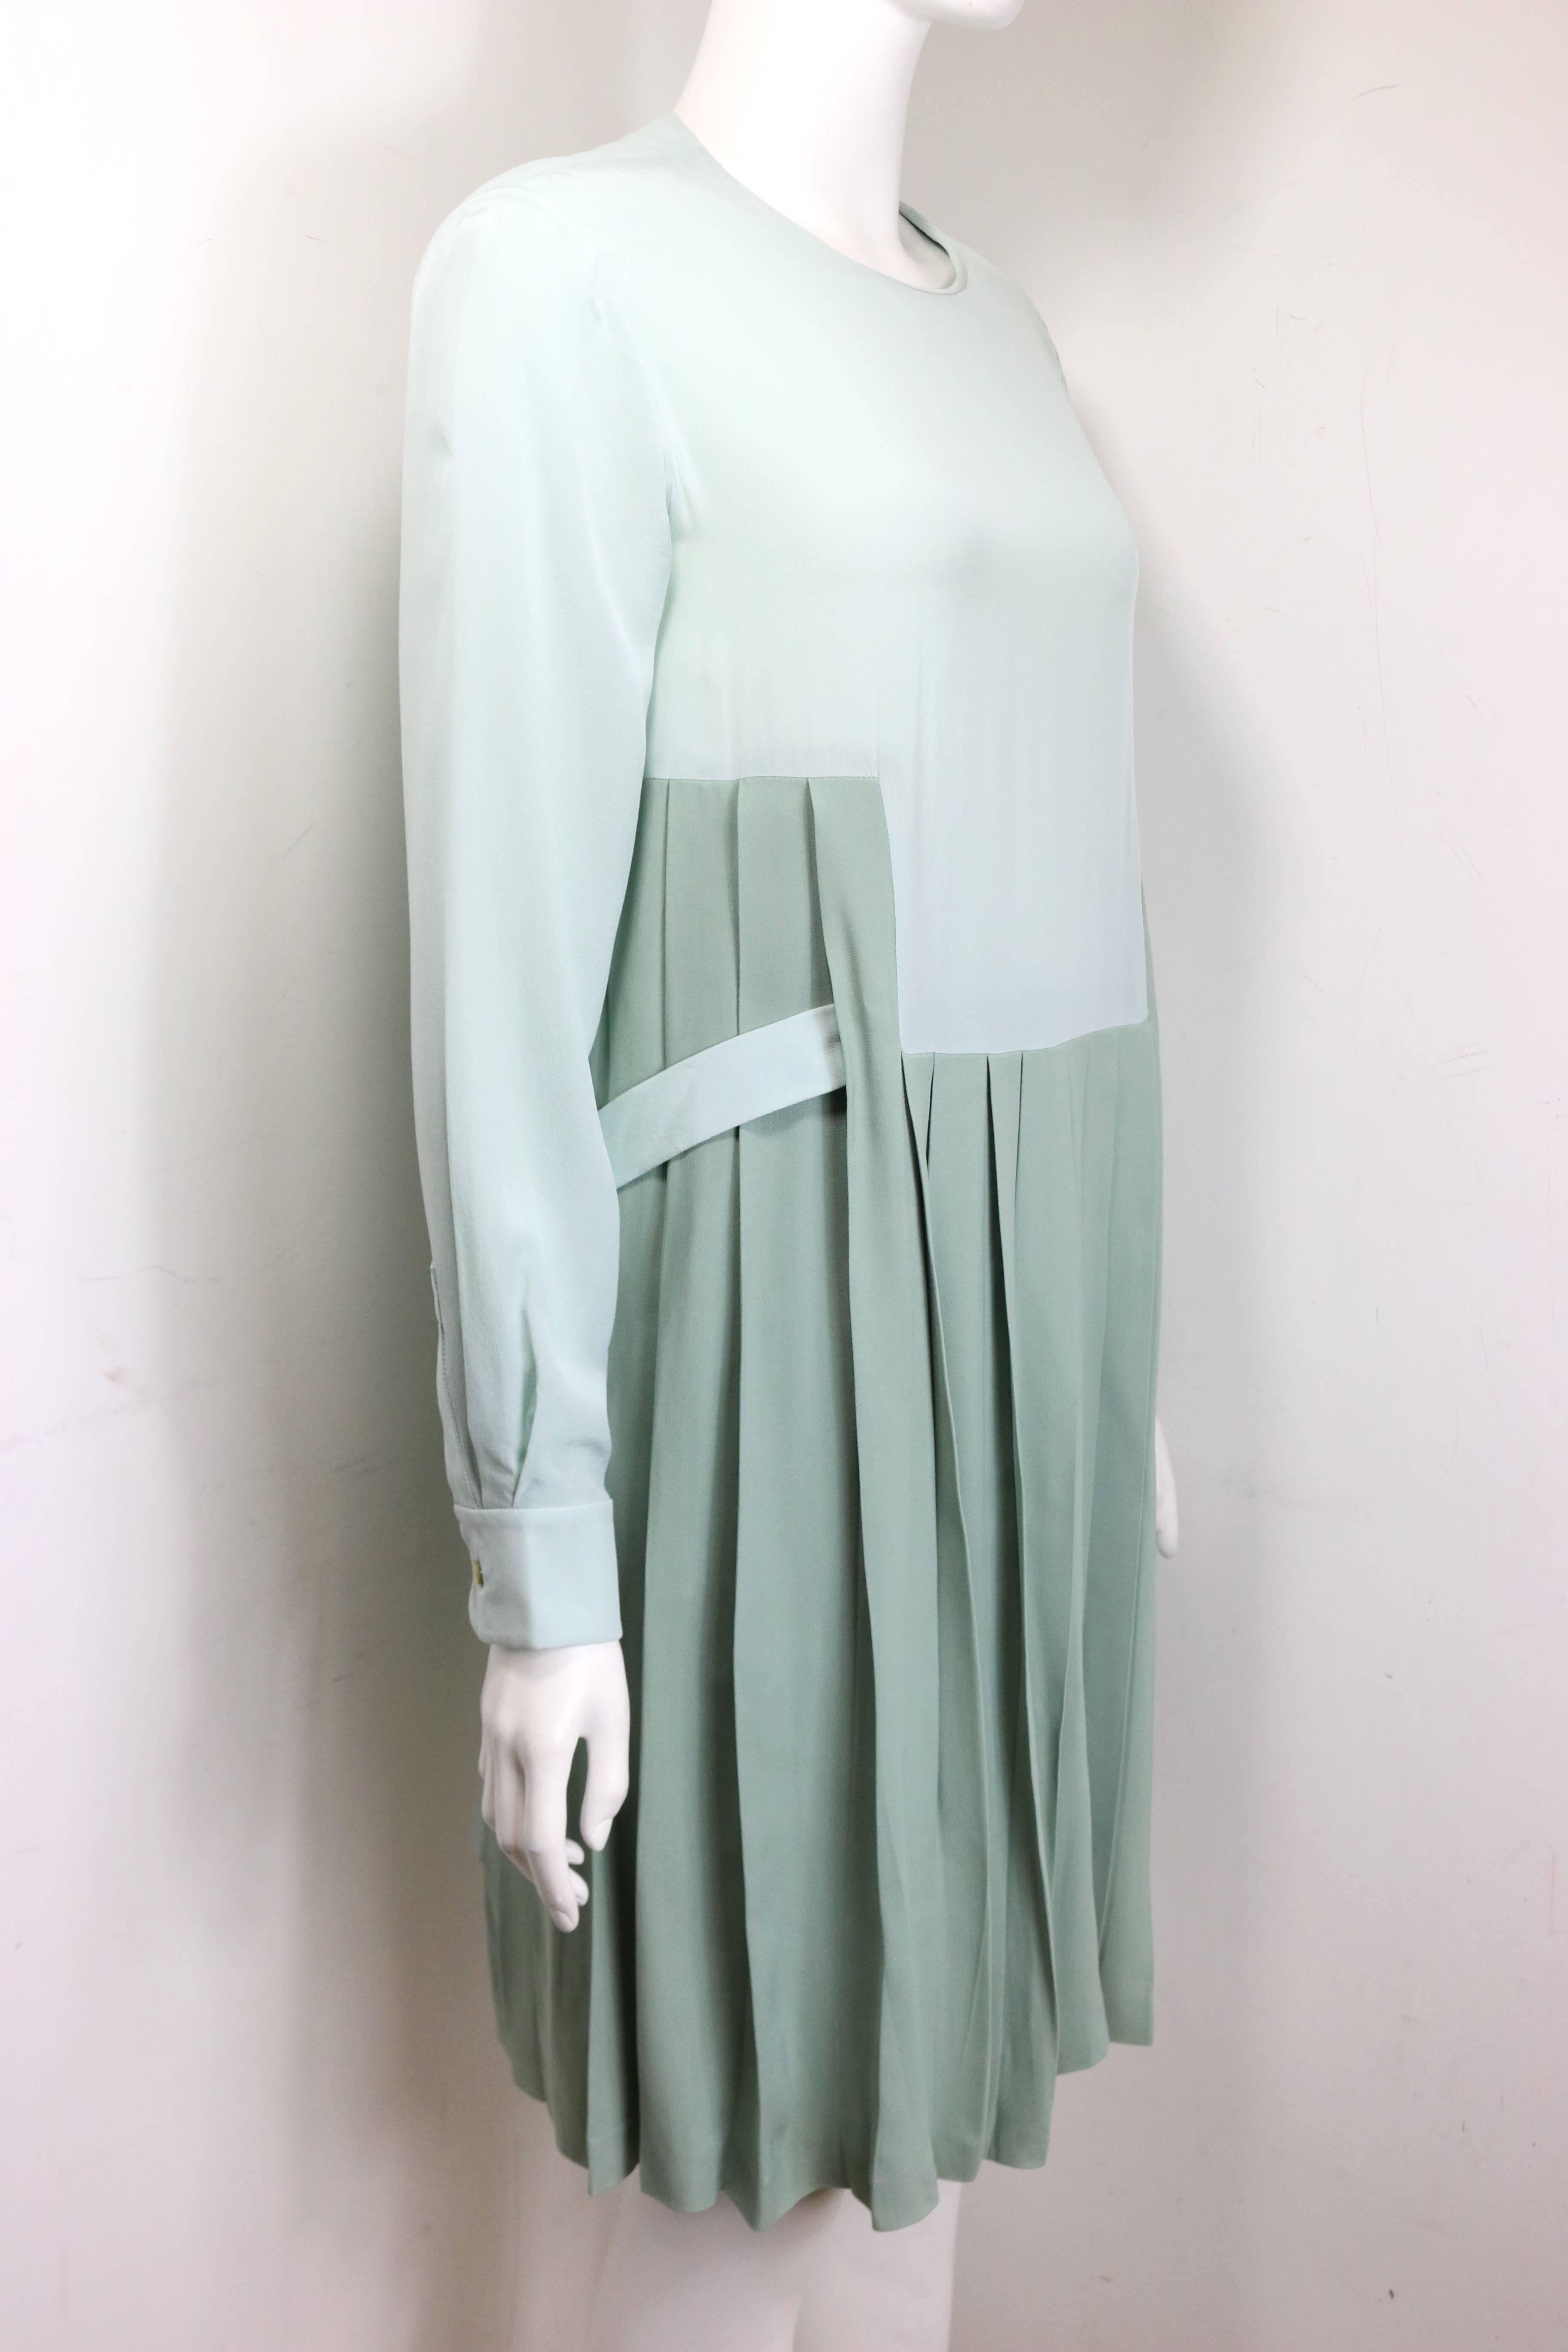 - Chloe green silk two-tone pleated long sleeves dress. Double layer with a white layer underneath. 

- There is a belt on the waist with button closure. 

- Back 